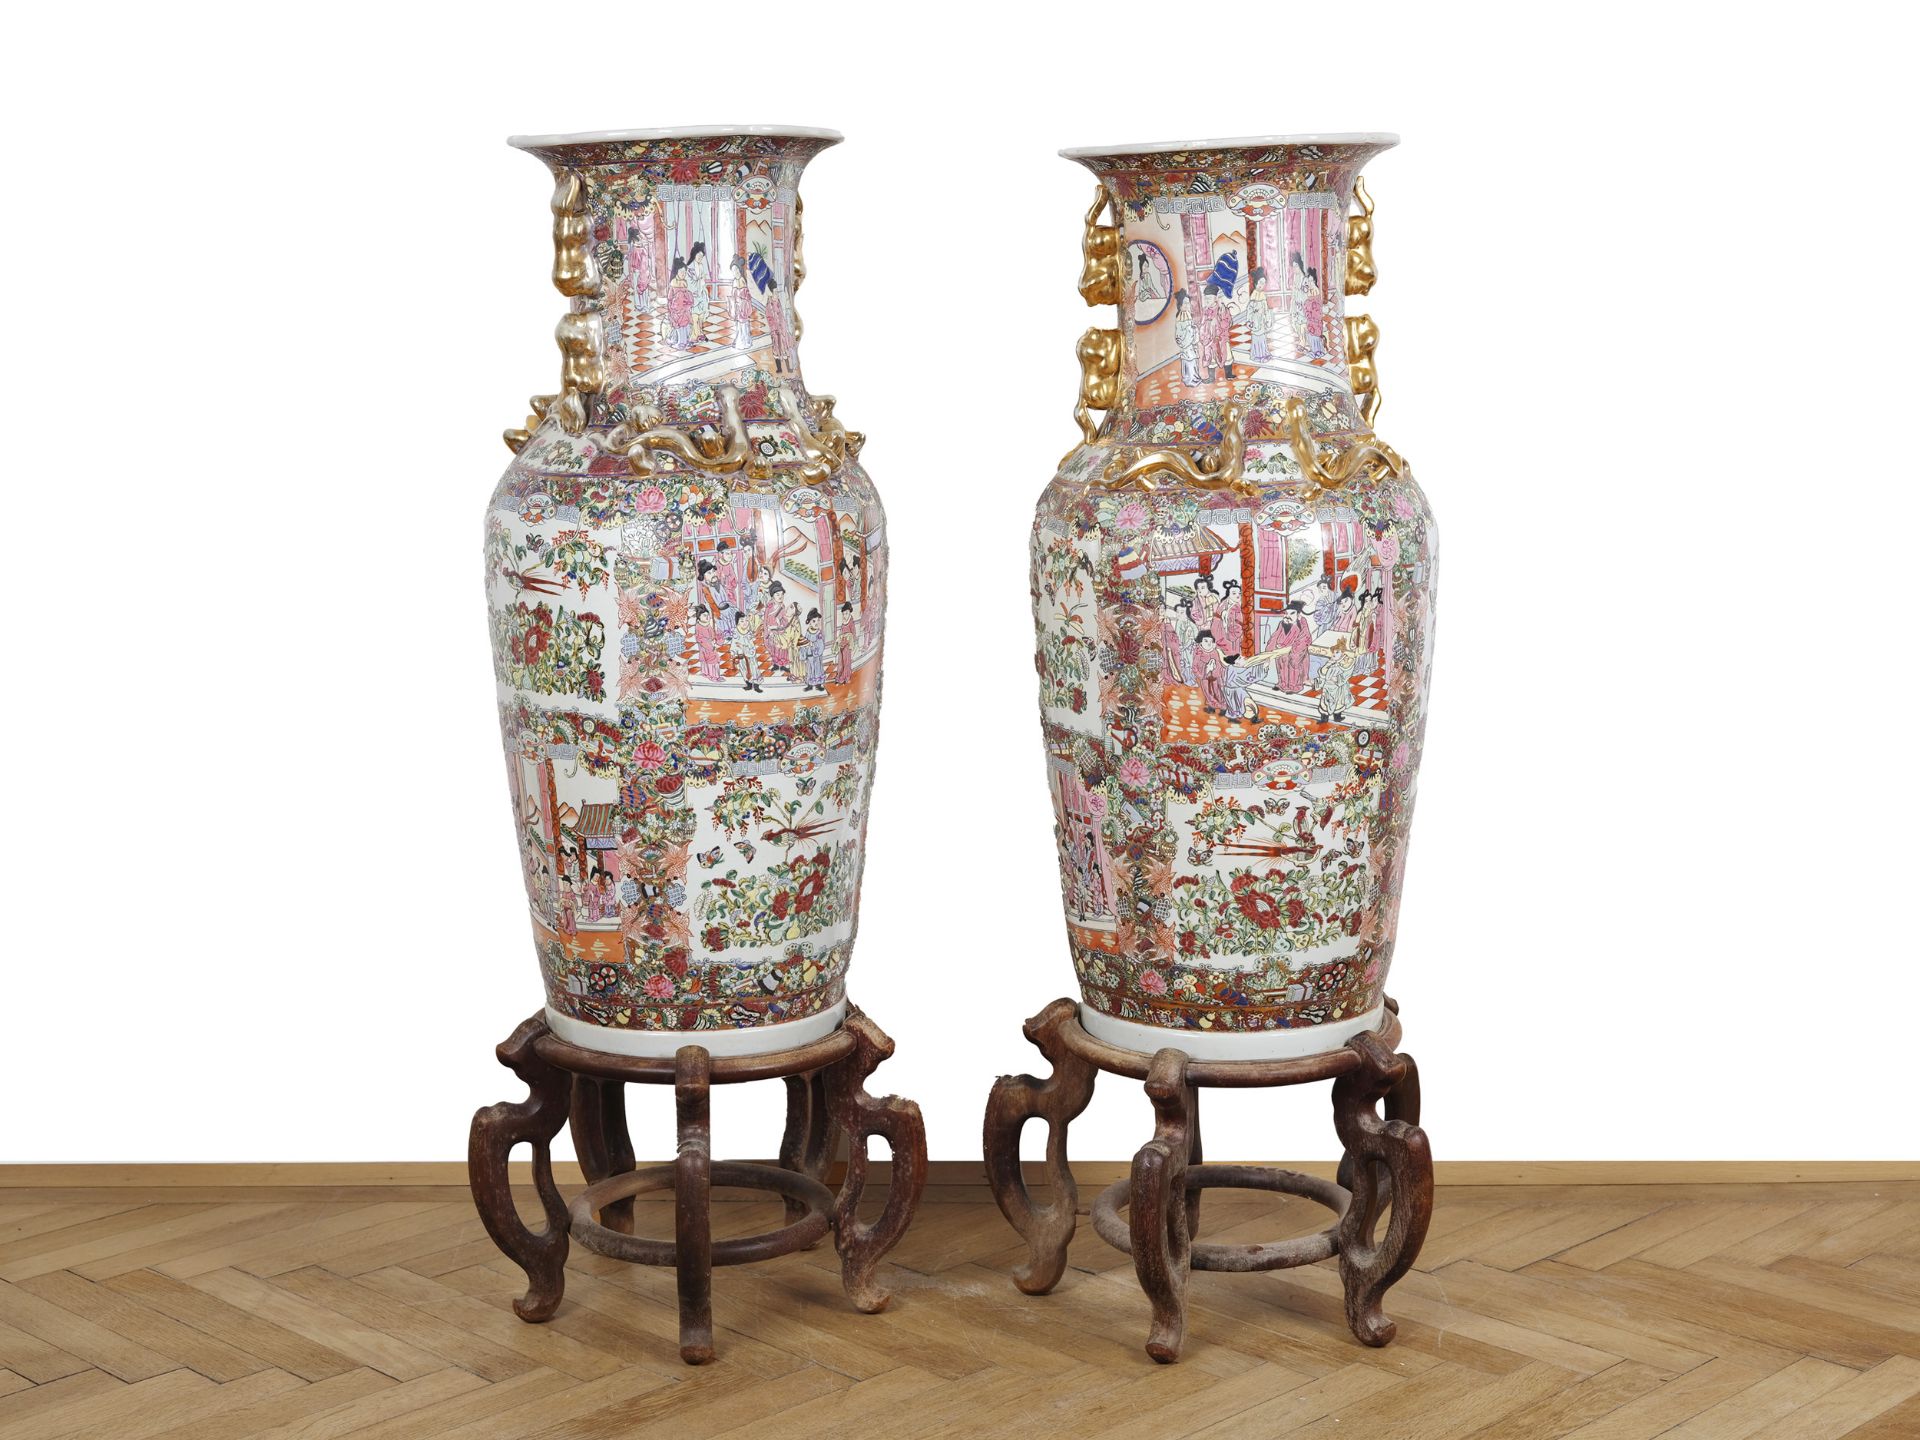 Pair of vases with wooden base, China - Image 2 of 5